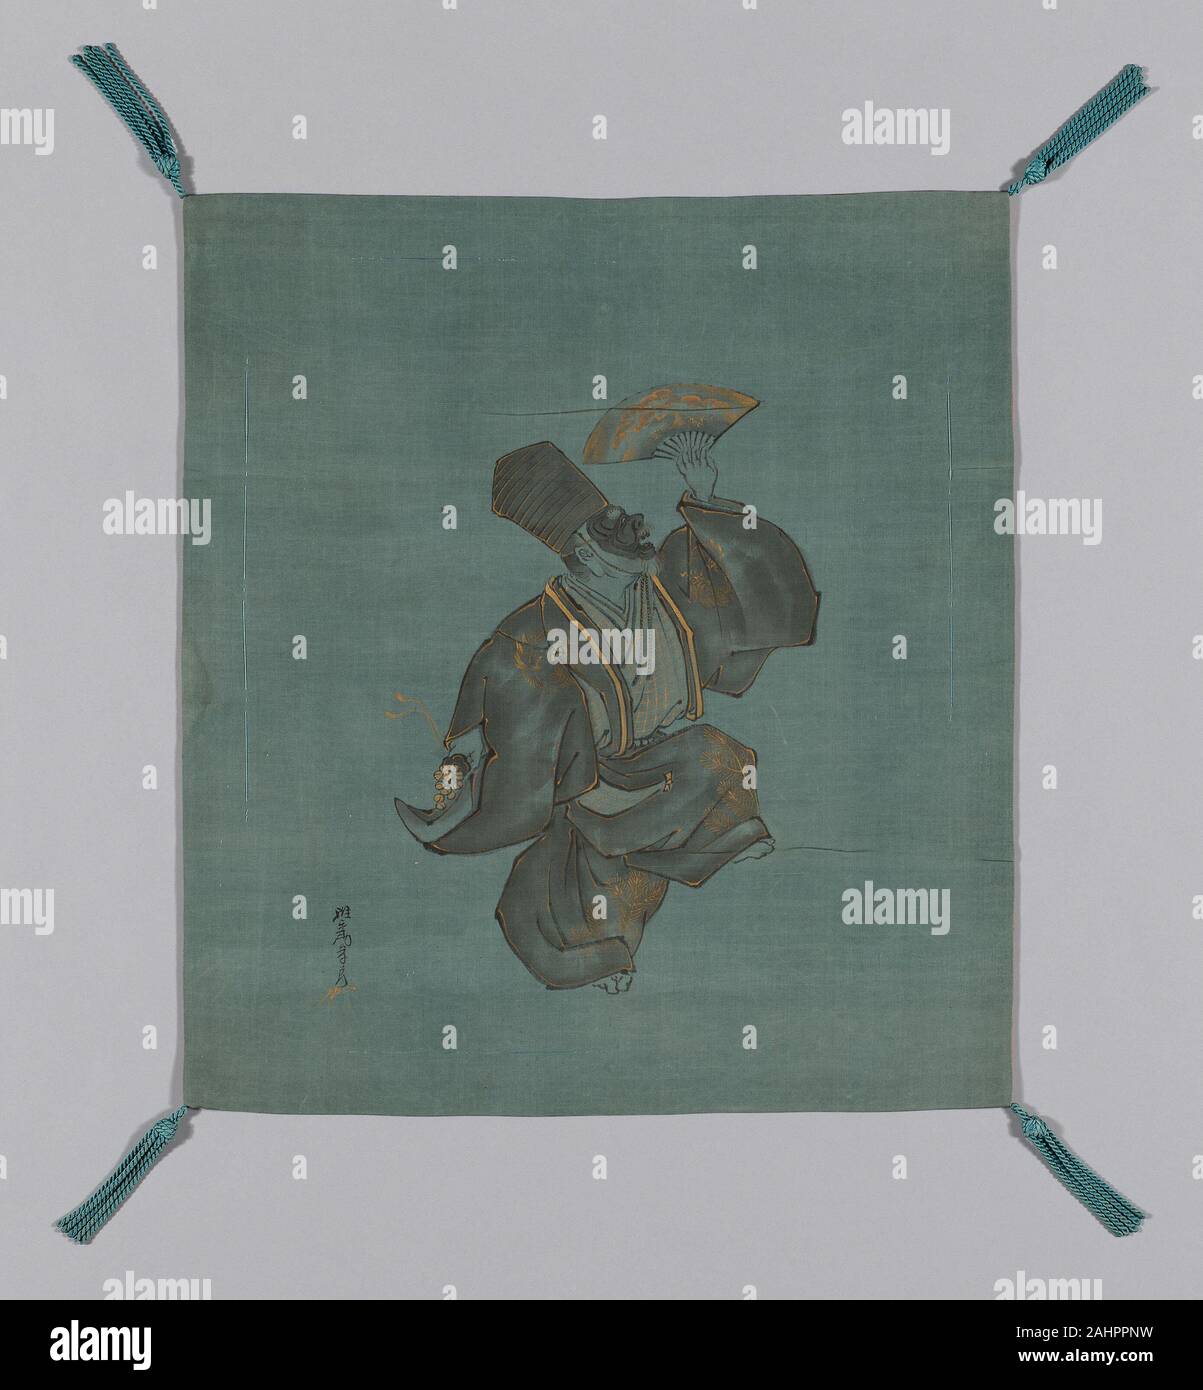 Saeki Ganryô. Fukusa (Gift Cover). 1801–1825. Japan. Patterned side silk, warp-faced, weft-ribbed plain weave (shioze); painted with India ink (sumi) and gold paint; lining silk, wrap-faced, weft-ribbed plain weave (shioze); sewn with front and lining matched in size (Tachikire awrase); silk, running controlling stitches along all edges; corners silk, knotted and re-piled fringe tassels Stock Photo